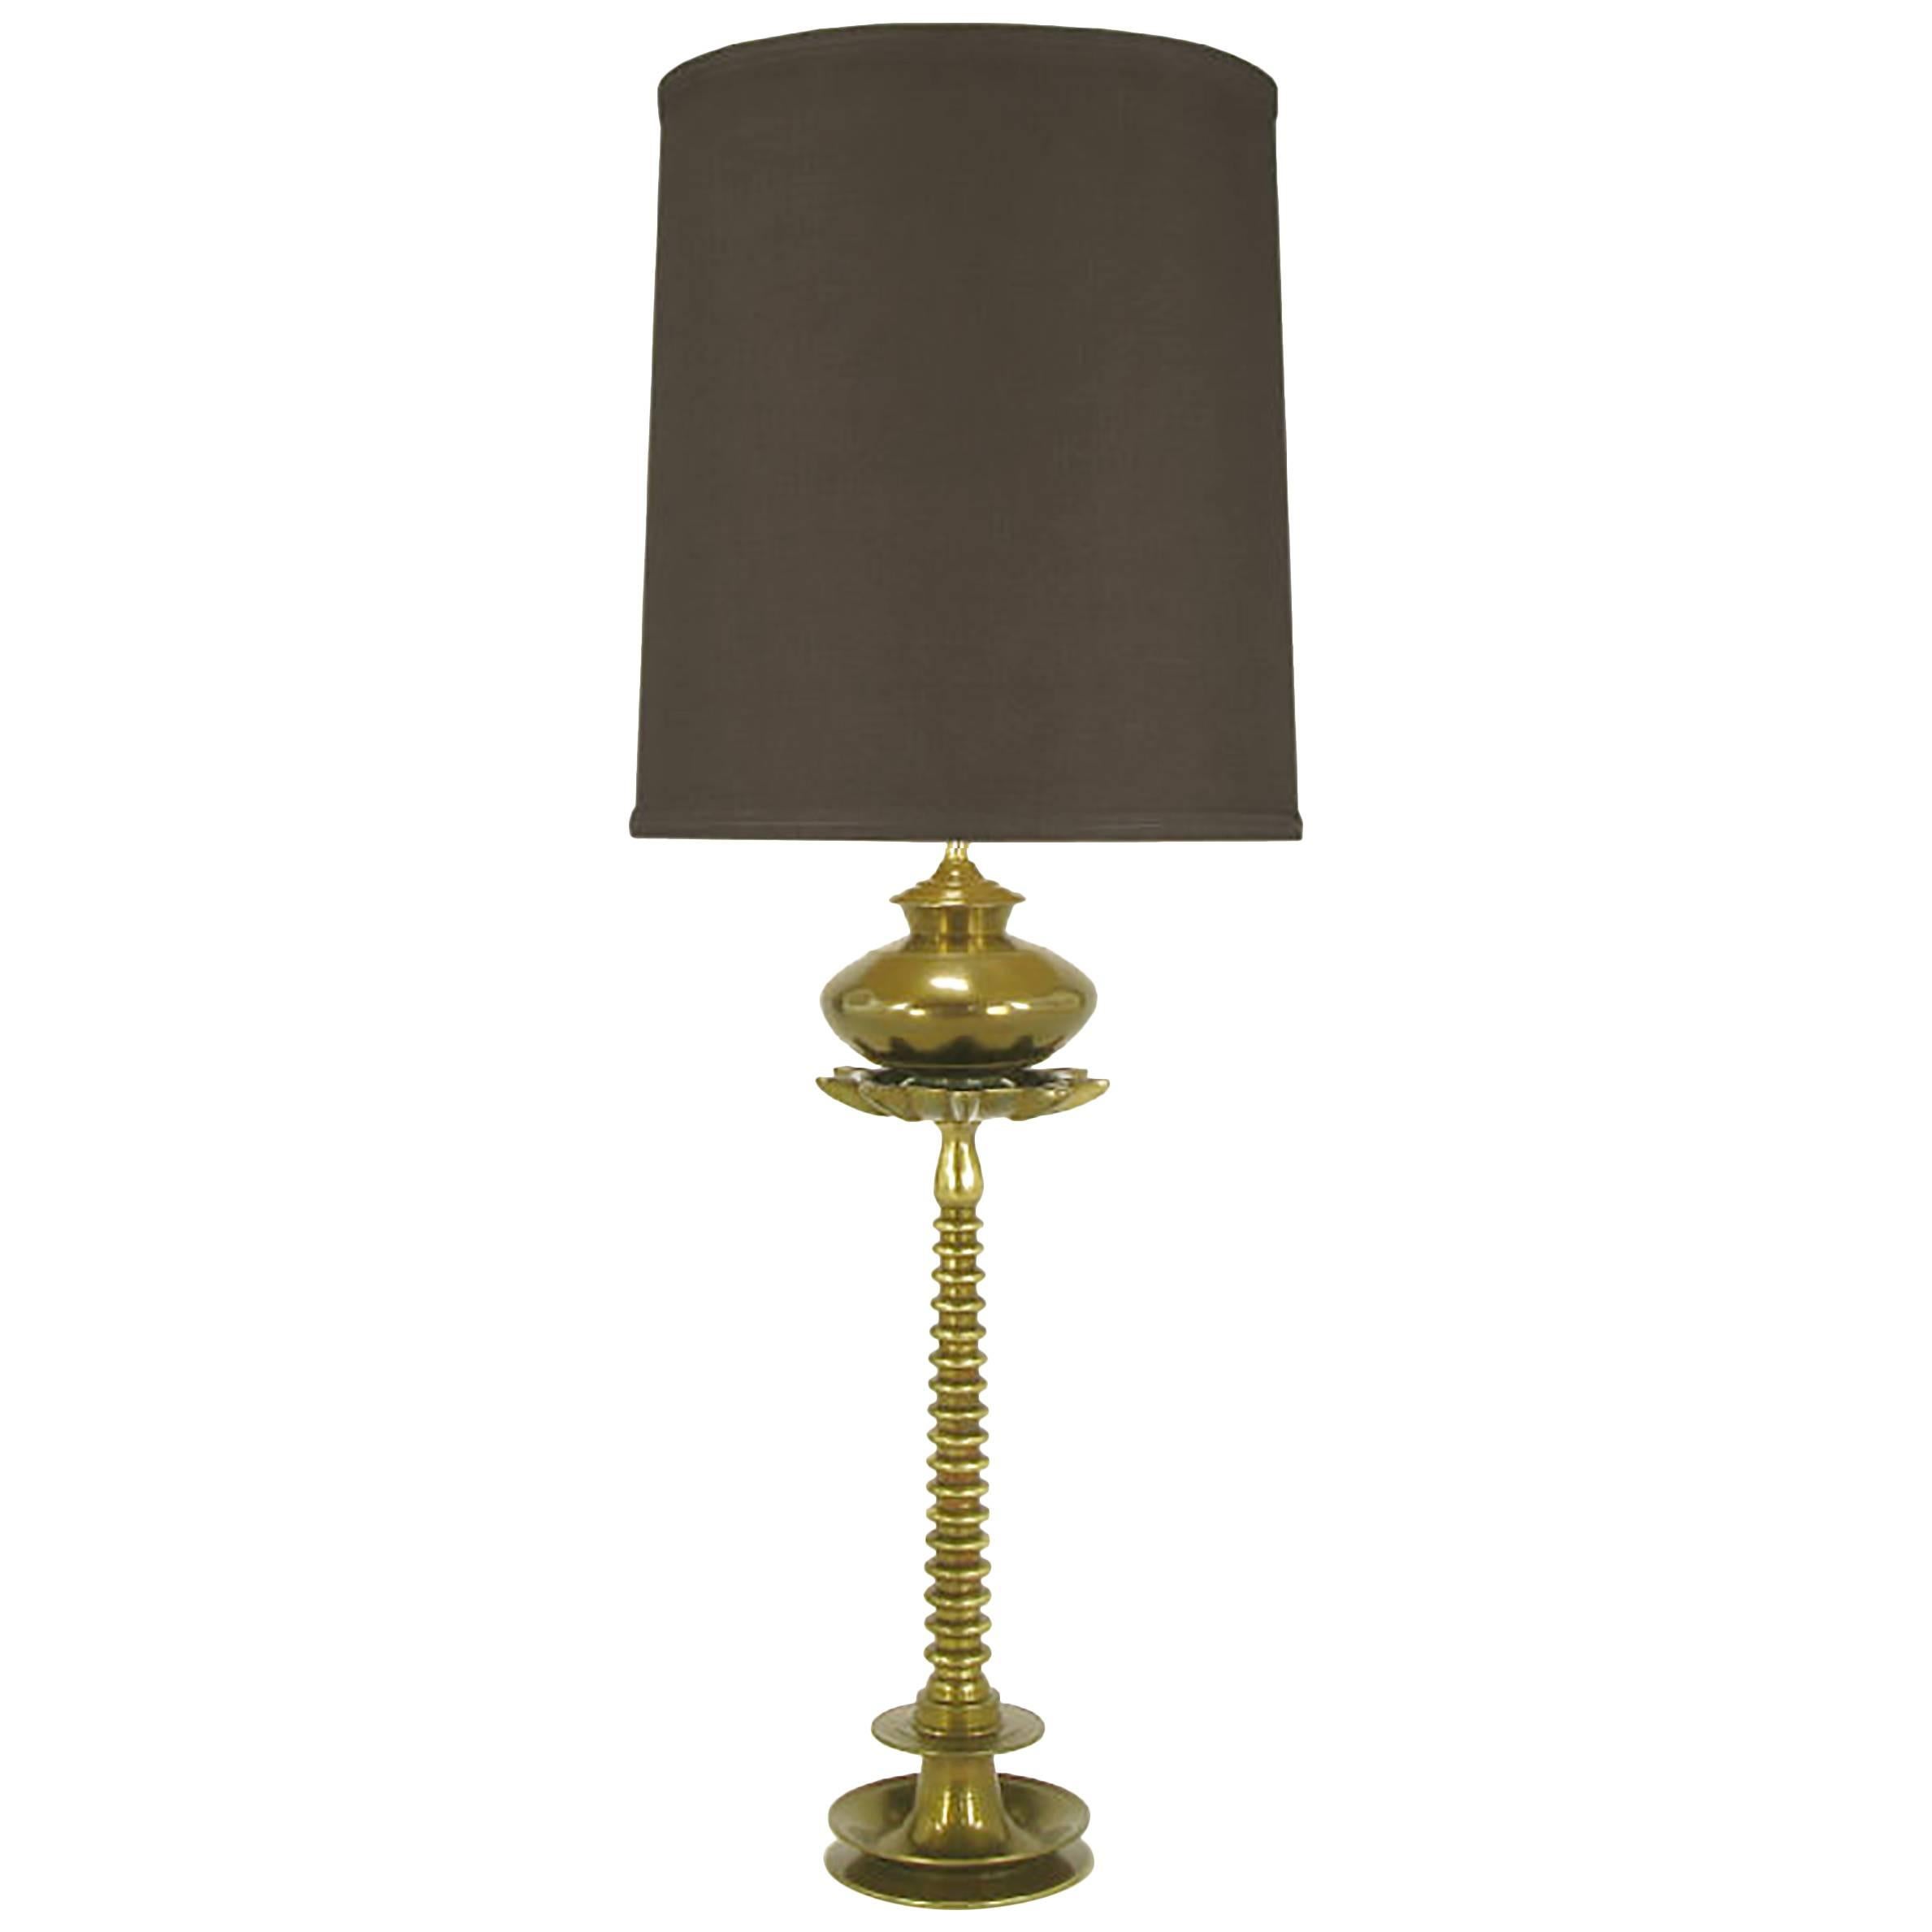 French Moderne Solid Brass Segmented Table Lamp For Sale